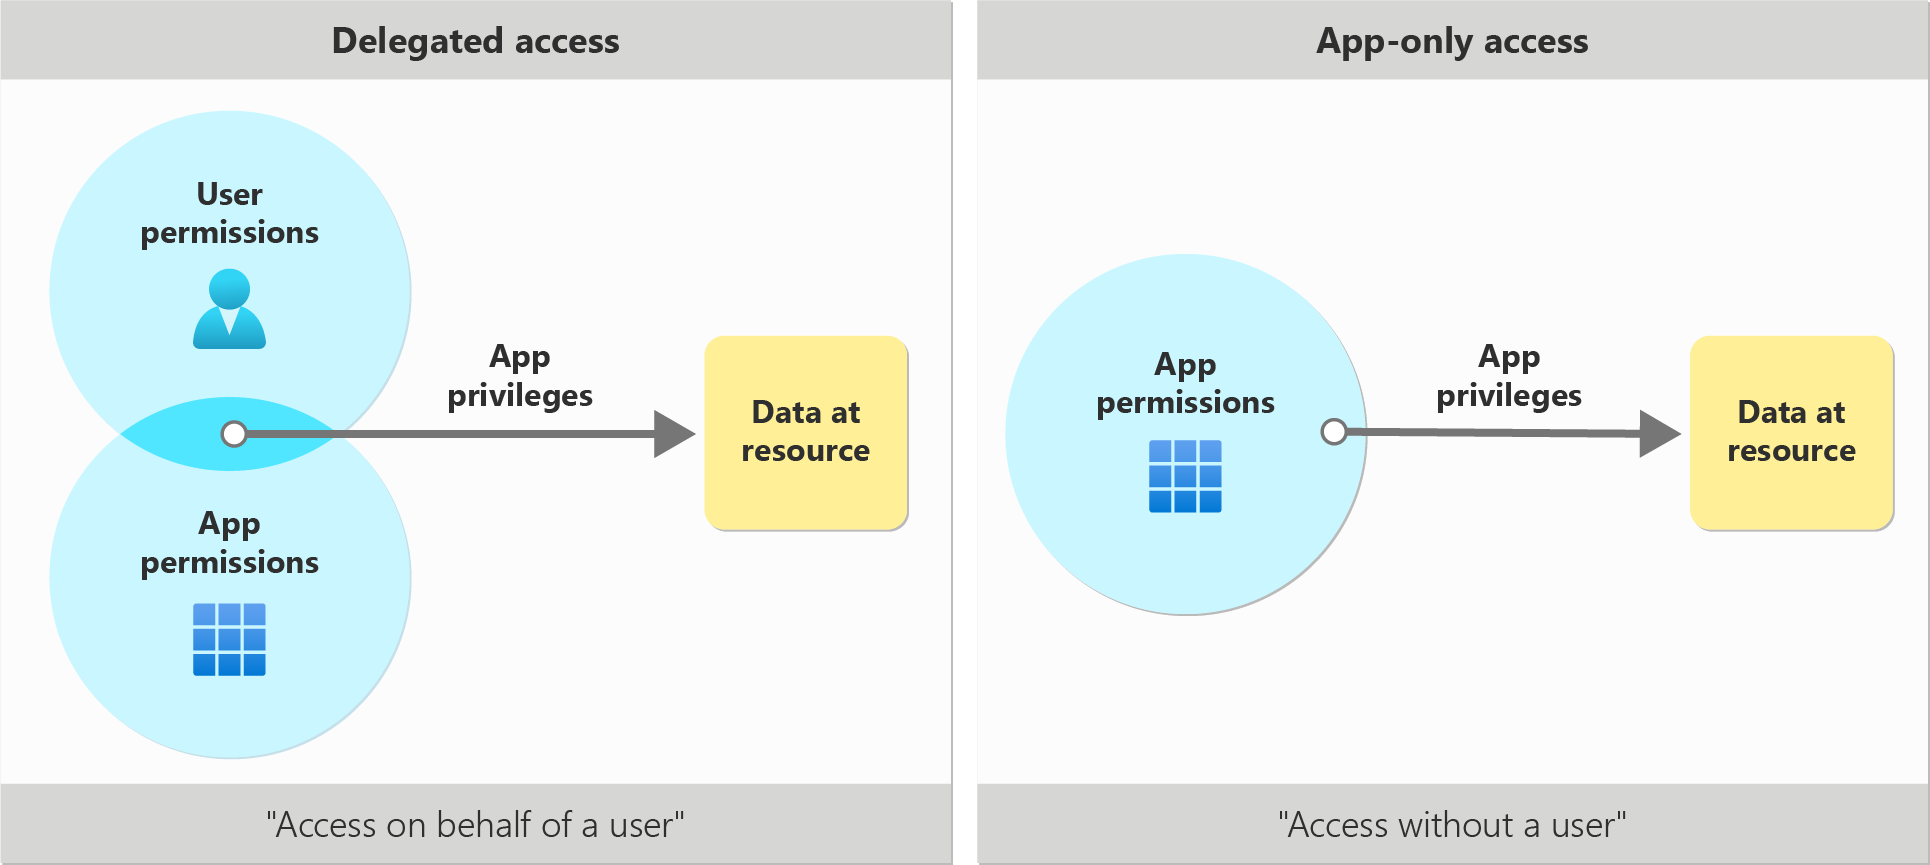 Illustration of application privileges in delegated vs app-only access scenarios.